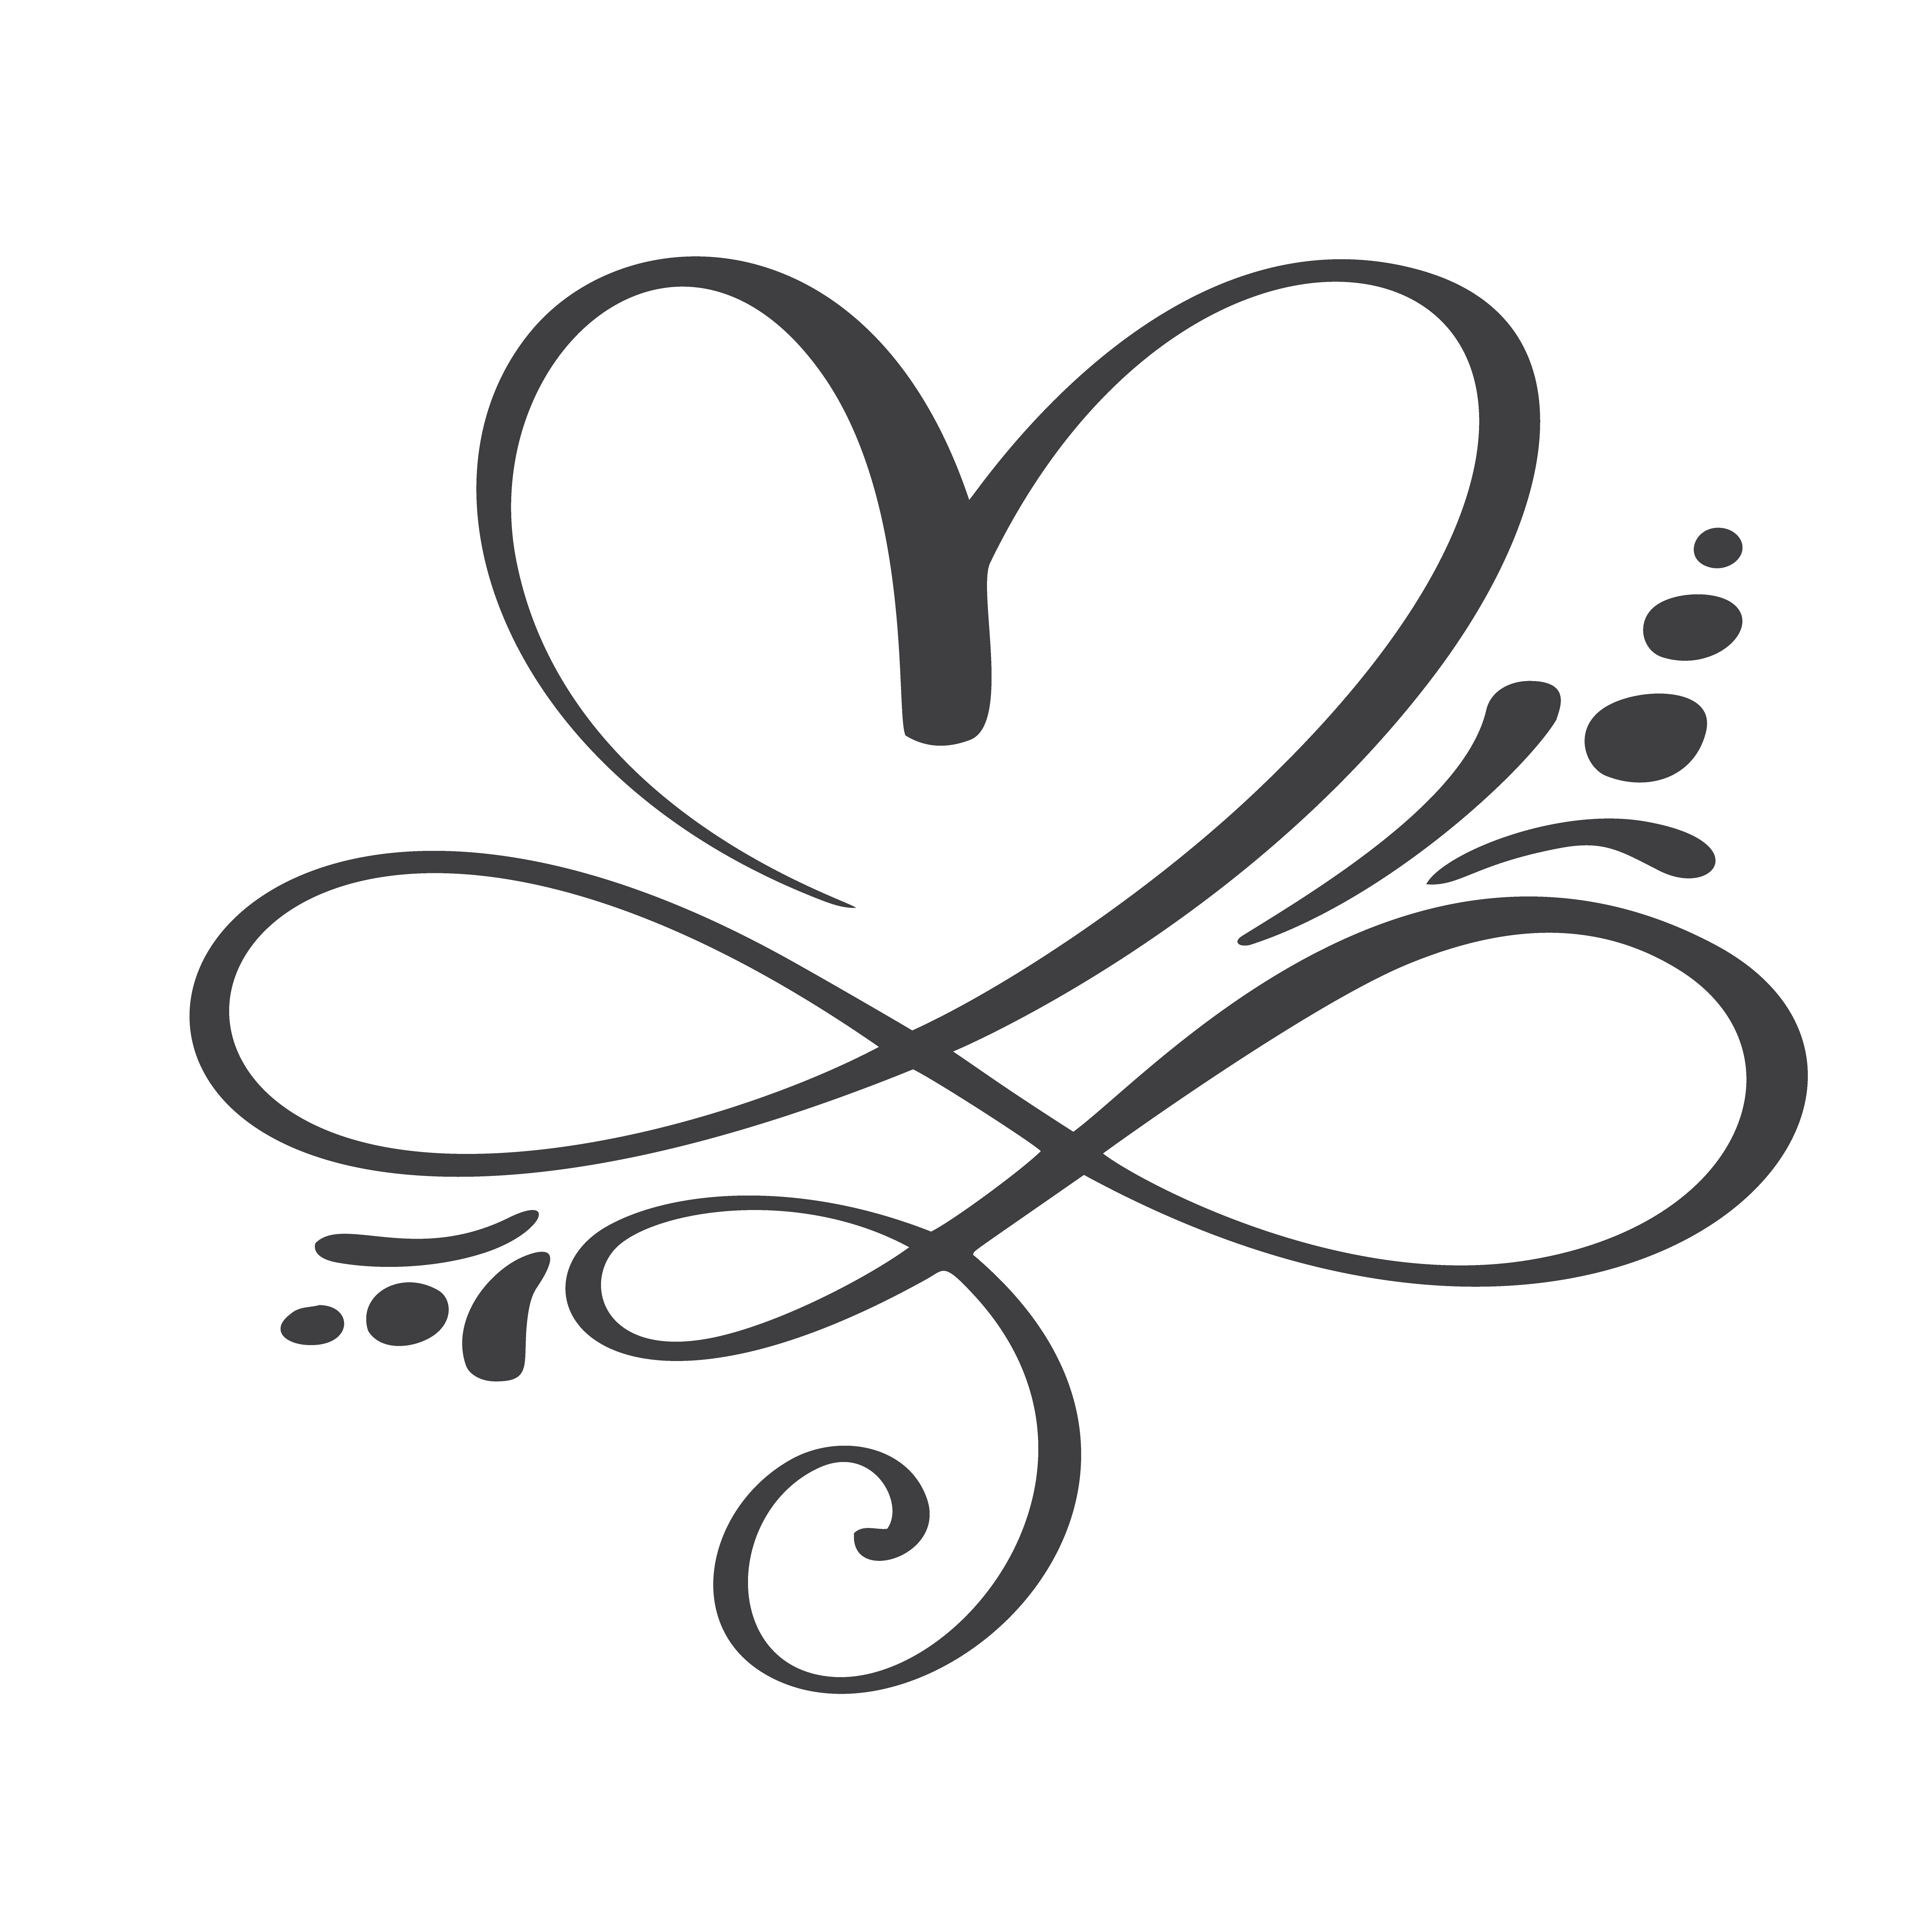 Download Heart love sign forever. Infinity Romantic symbol linked ...